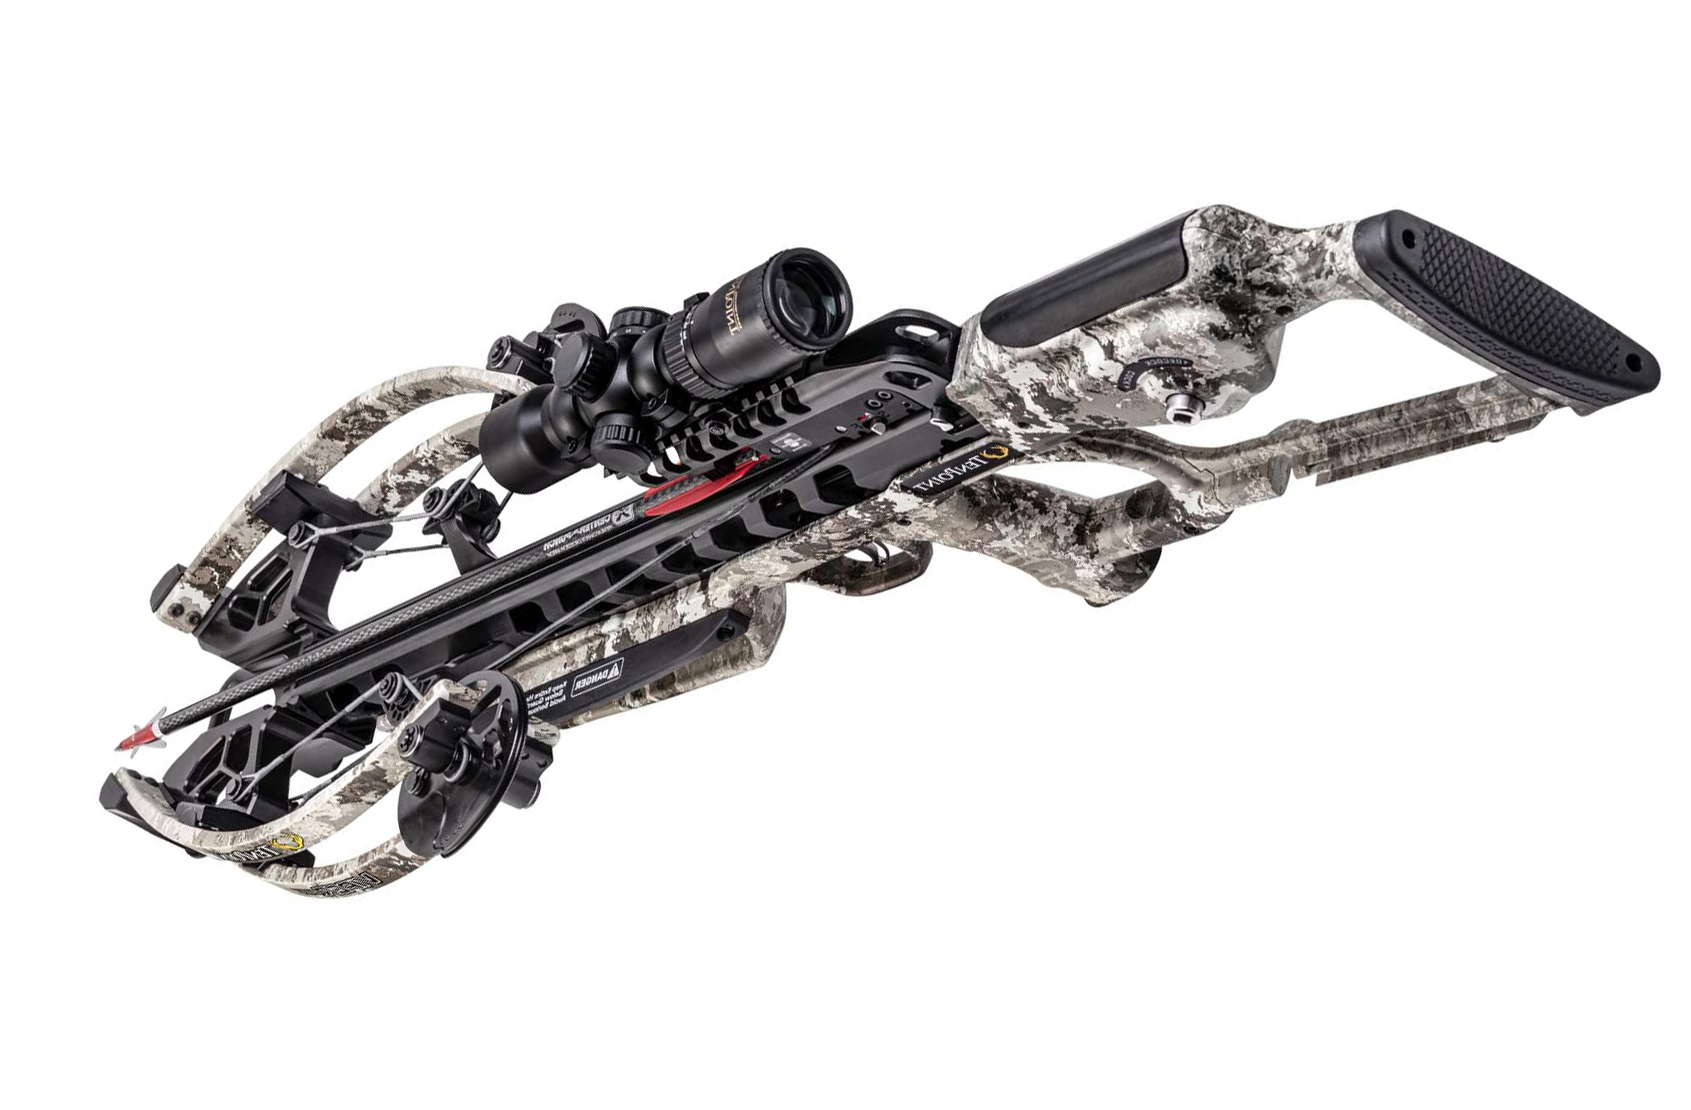 Viper S400 forward-draw crossbow by TenPoint